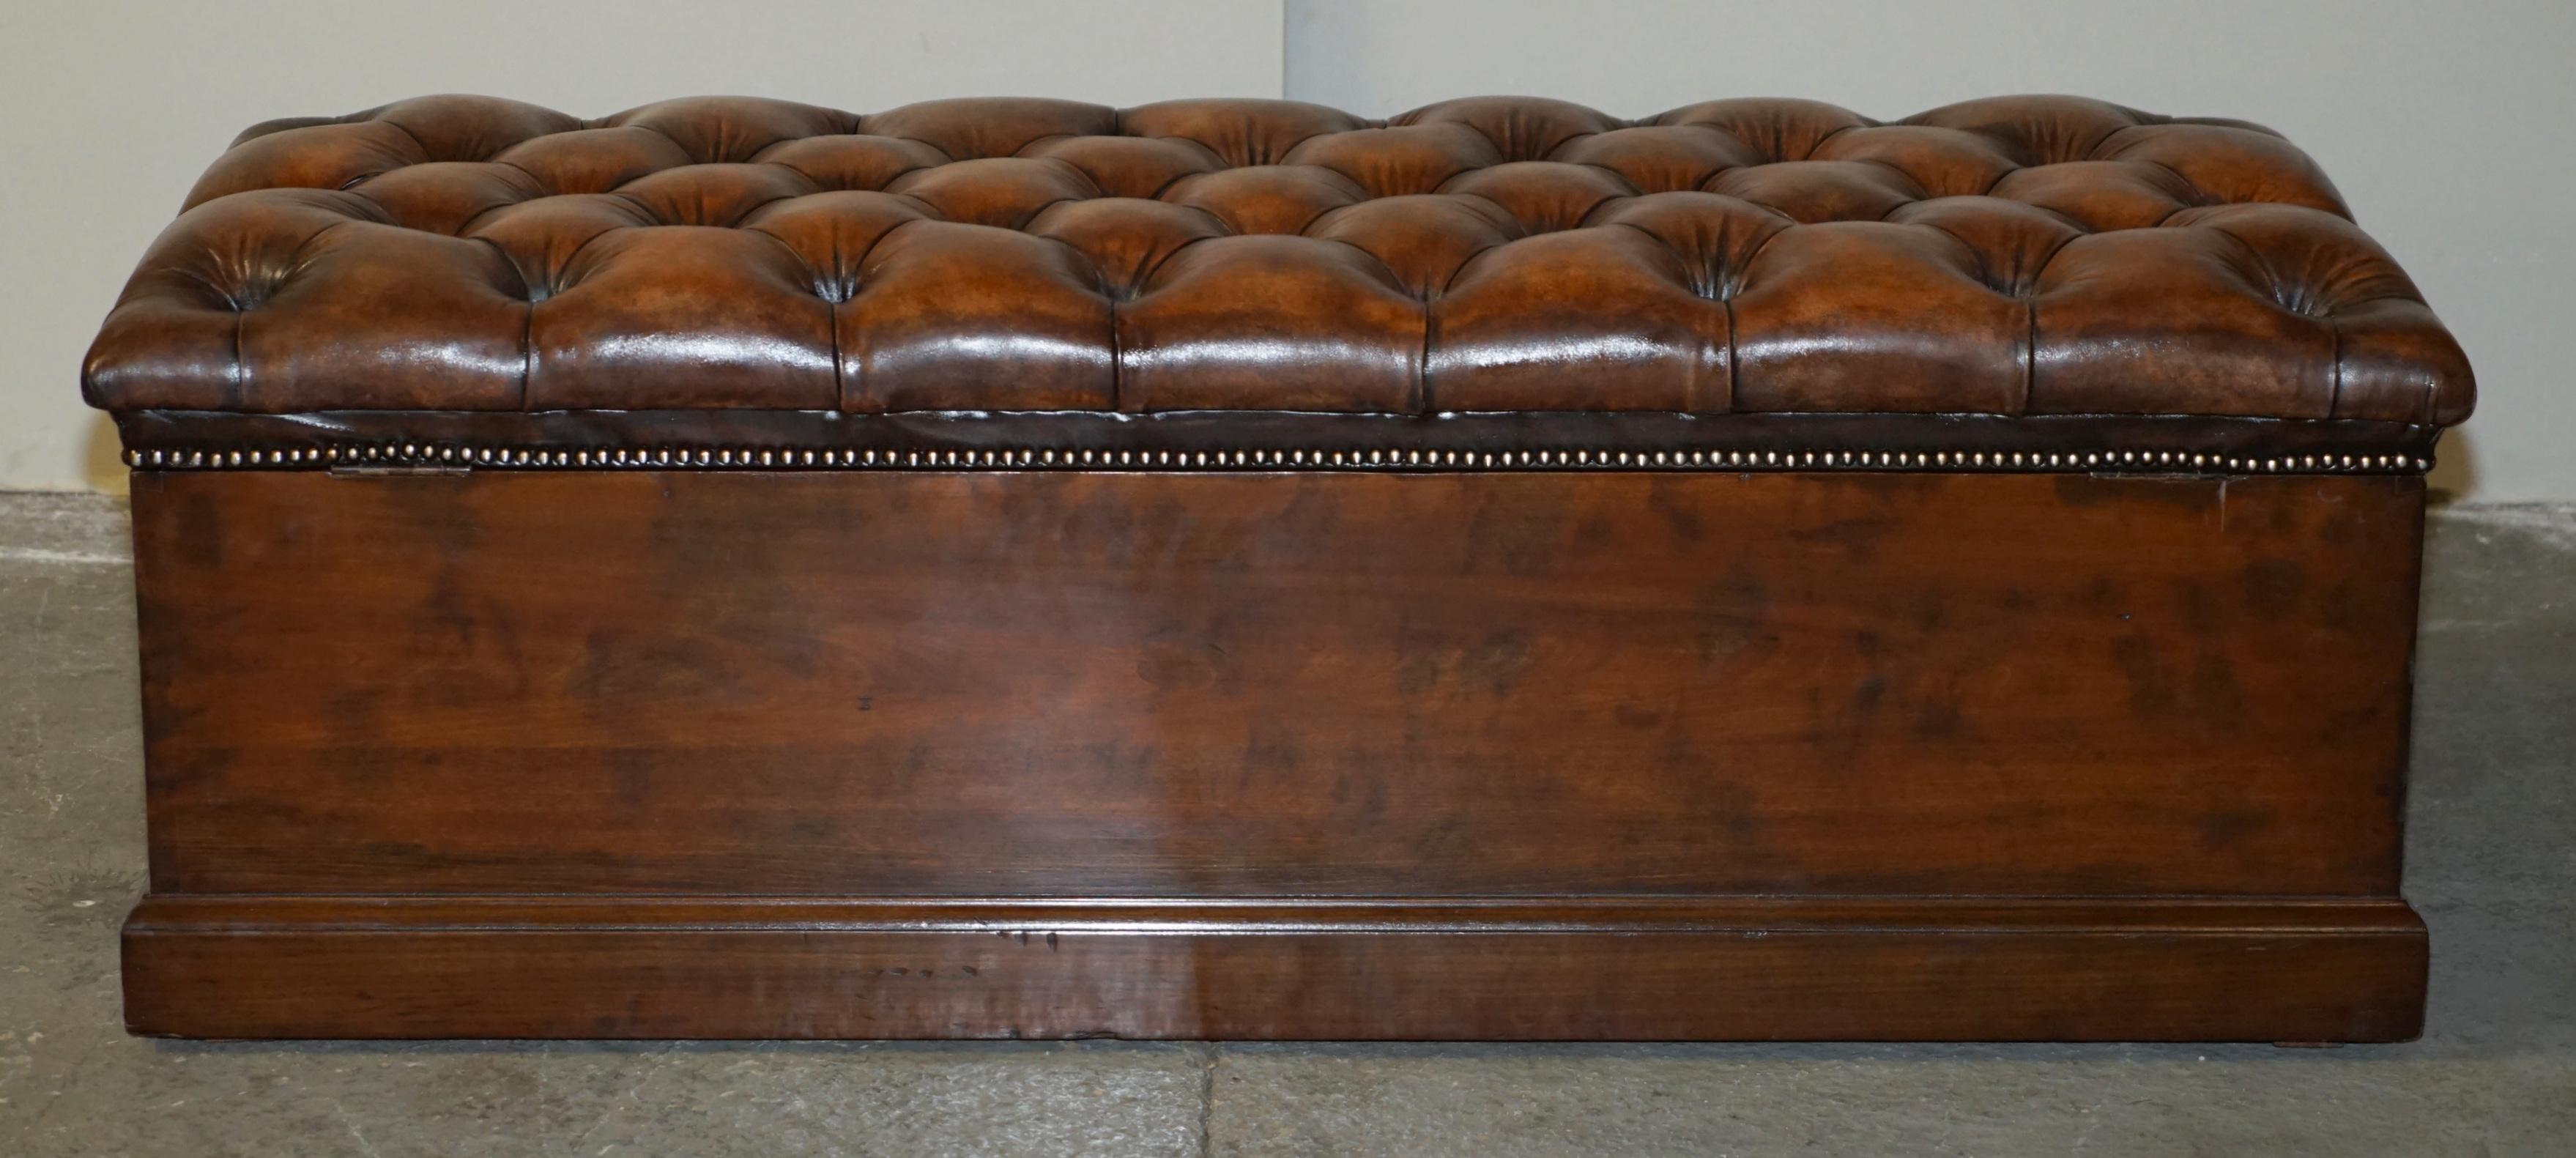 FULLY RESTORED ANTiQUE CIRCA 1890 CHESTERFIELD BROWN LEATHER LINEN STORAGE TRUNK For Sale 9